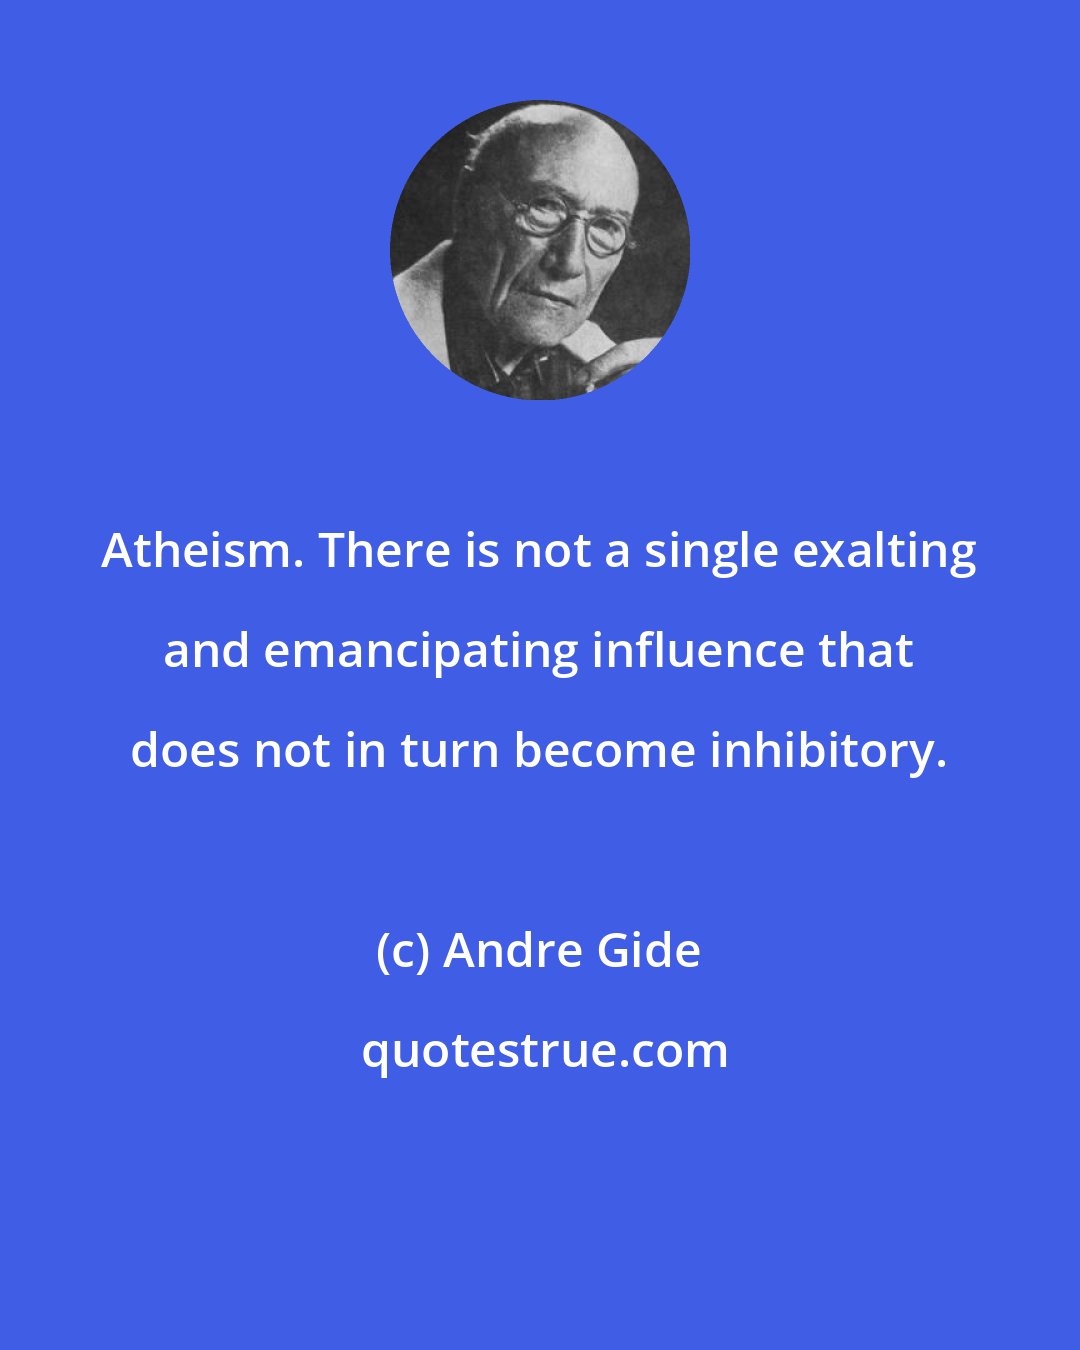 Andre Gide: Atheism. There is not a single exalting and emancipating influence that does not in turn become inhibitory.